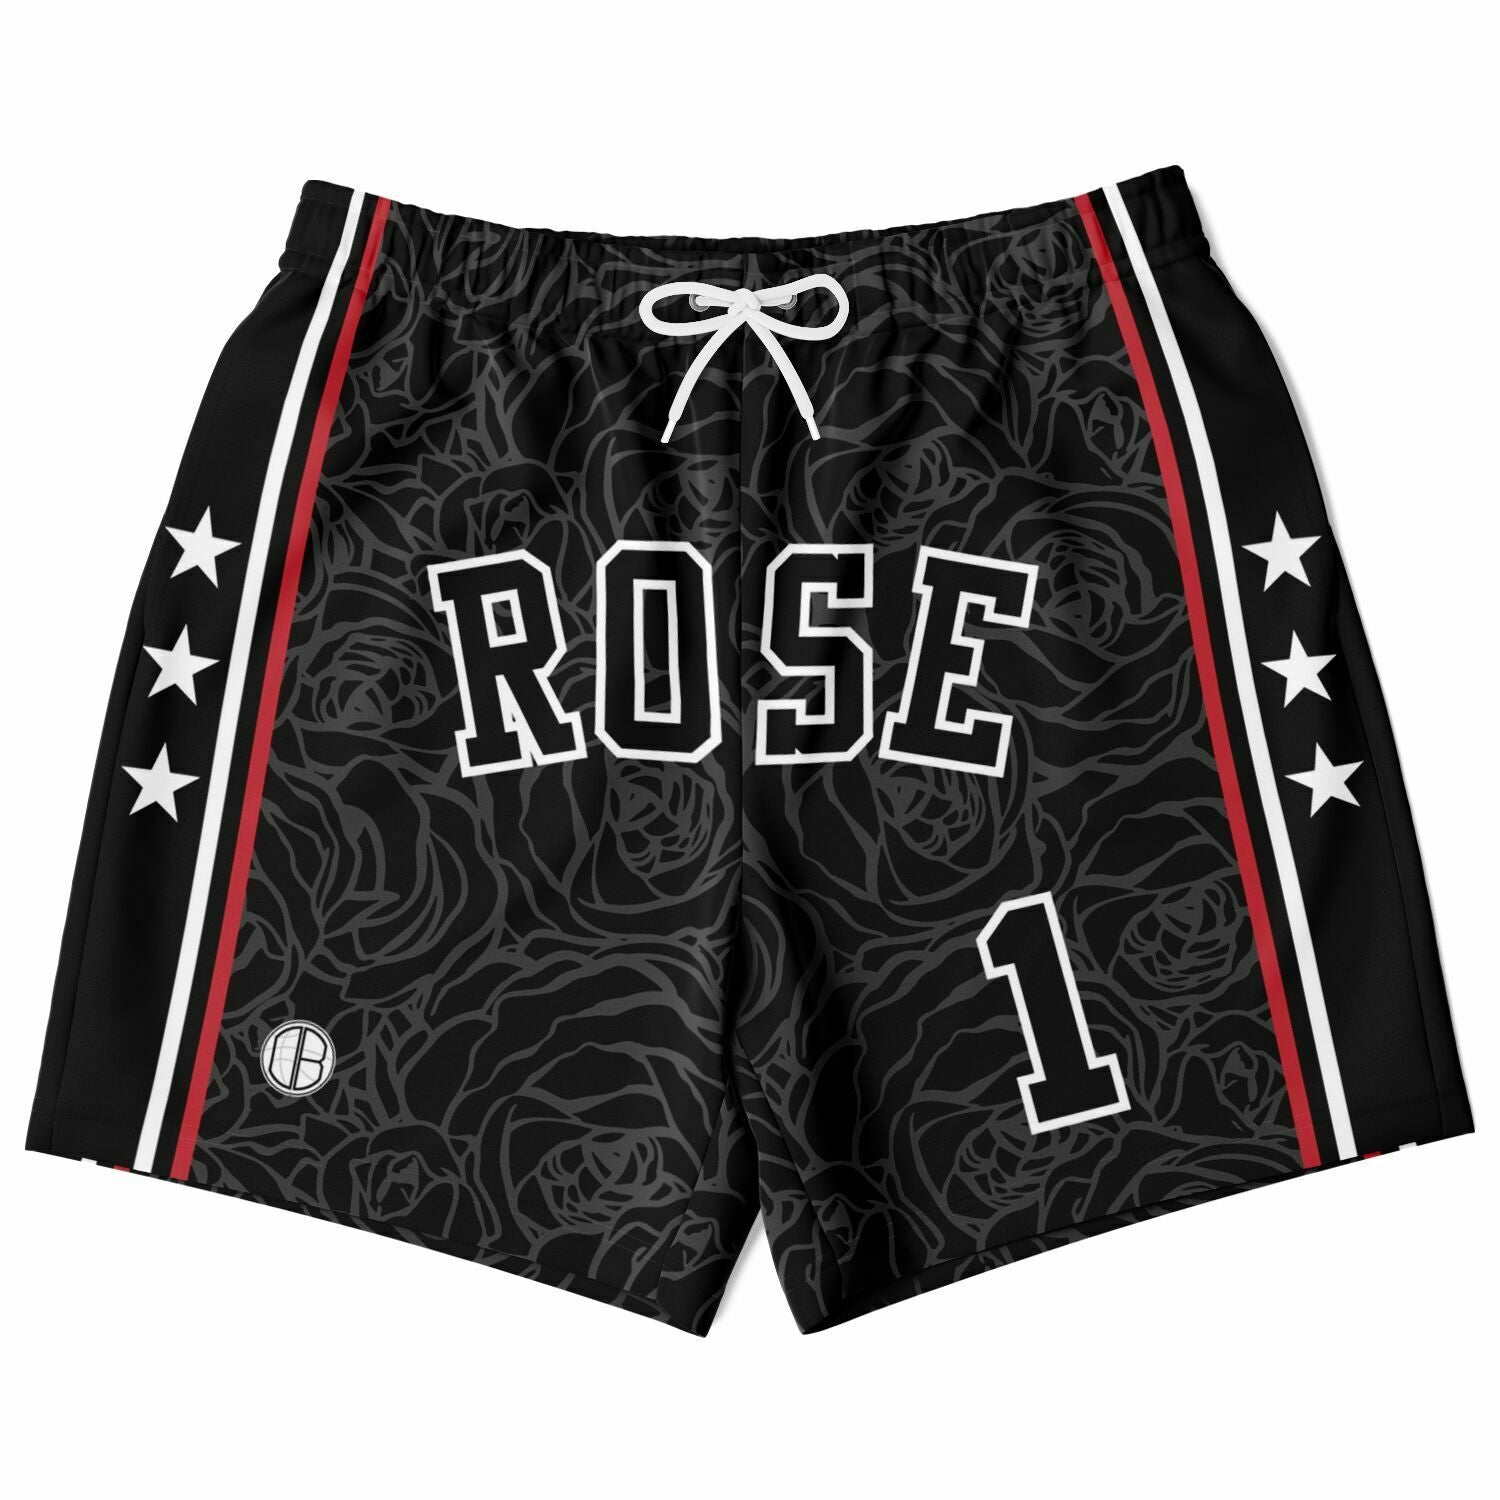 DEARBBALL SHORTS MESH LOS ANGELES - LA 24 8 INFINITY LIMITED EDITION ♾ -  DearBBall™